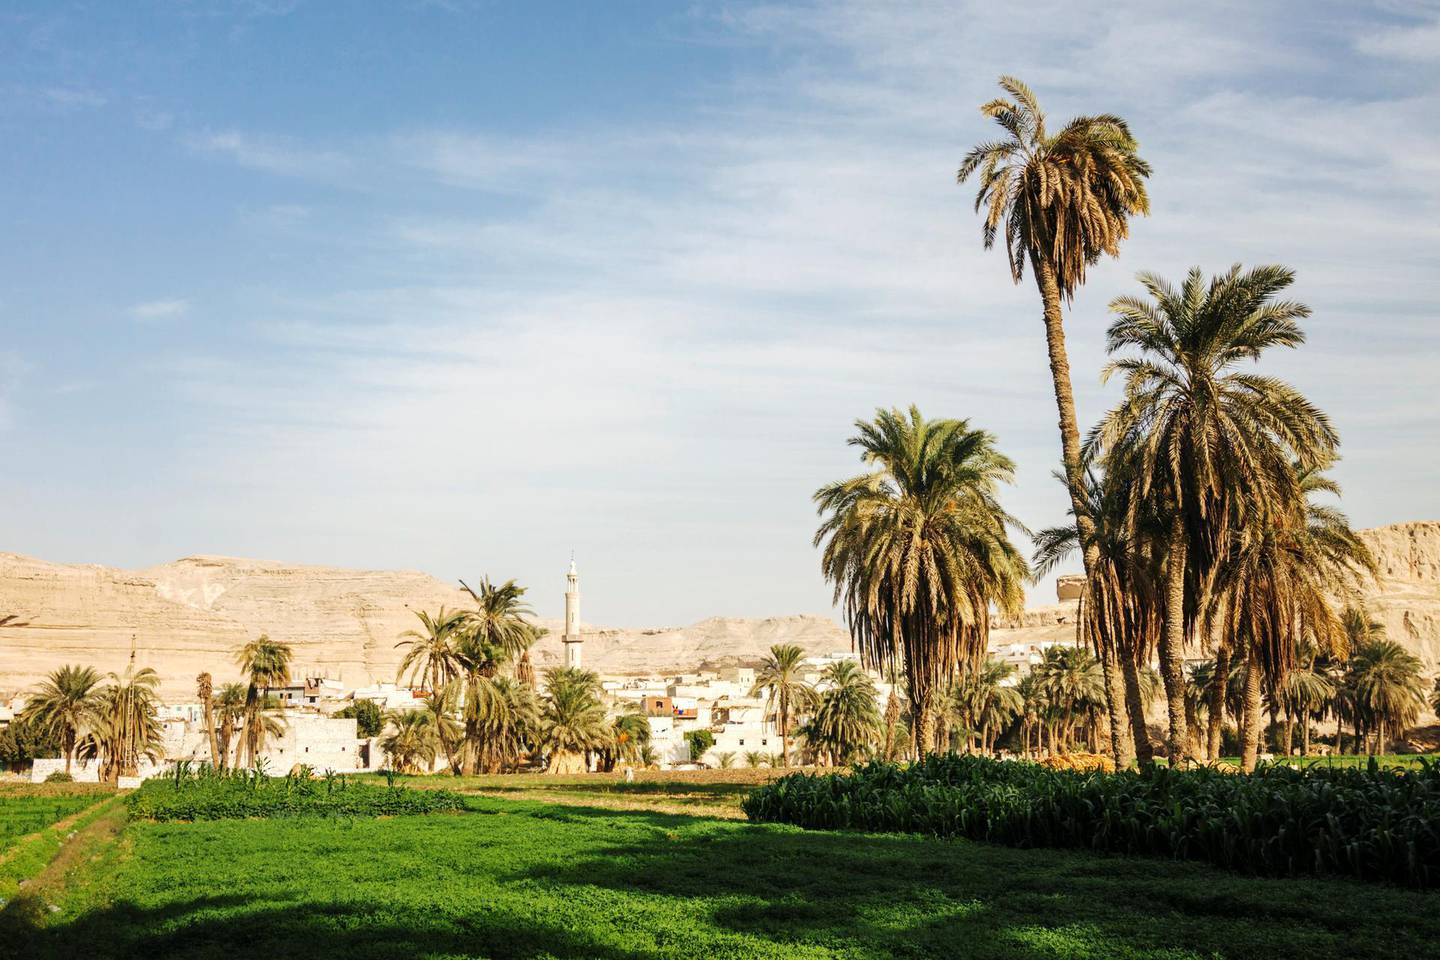 Minya, Egypt - November 3rd, 2011 : Traditional village in a palm grove at the outskirts of Minya